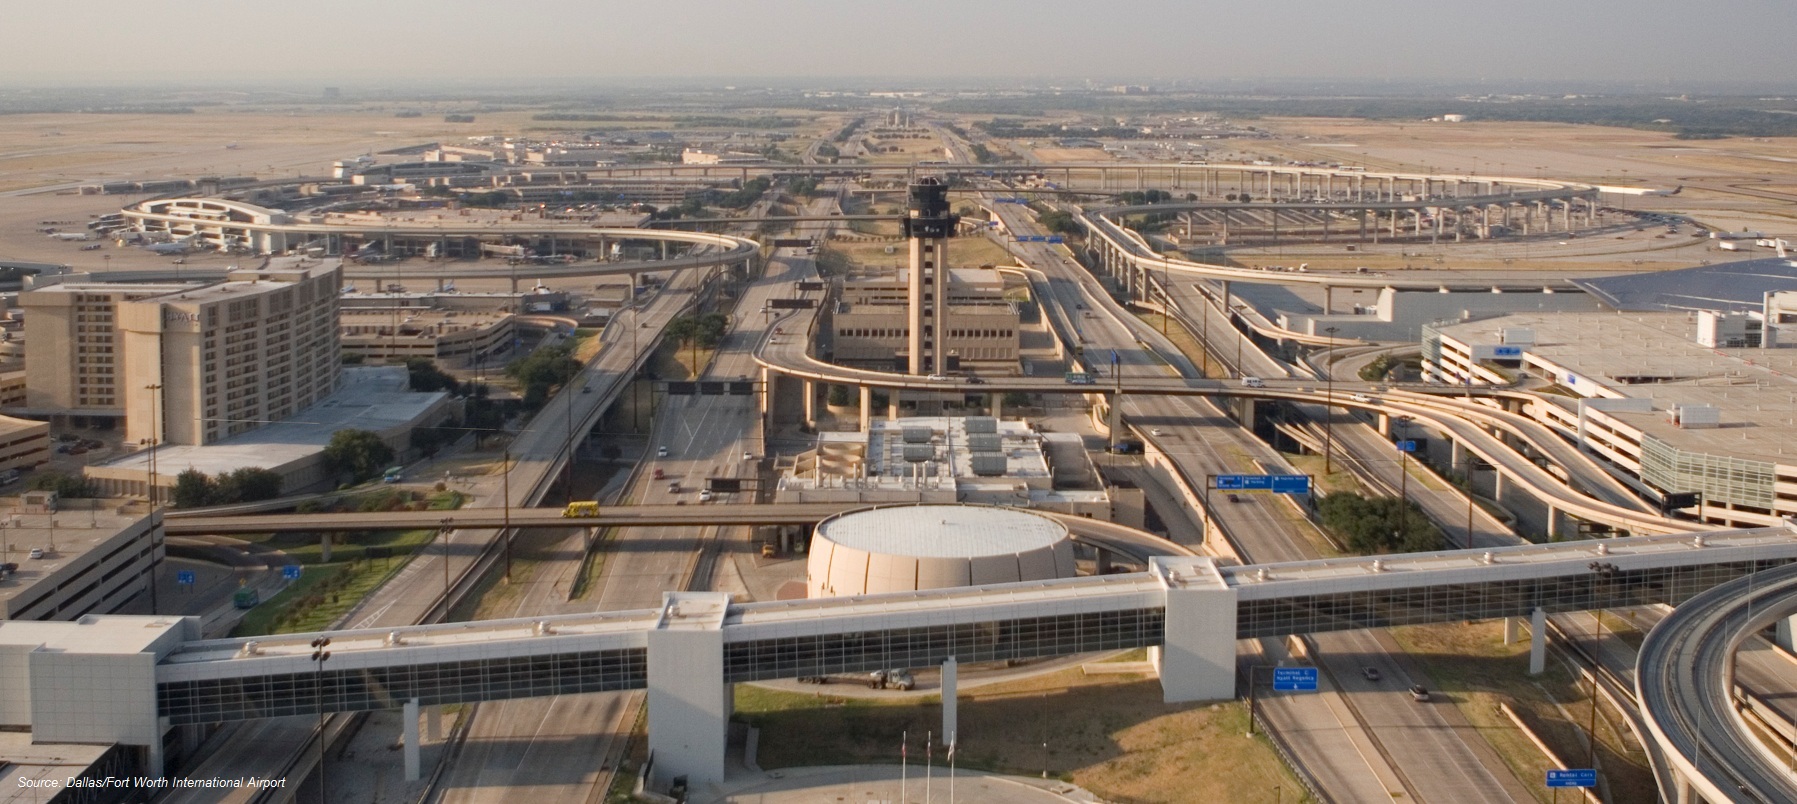 Opinions on Dallas/Fort Worth International Airport